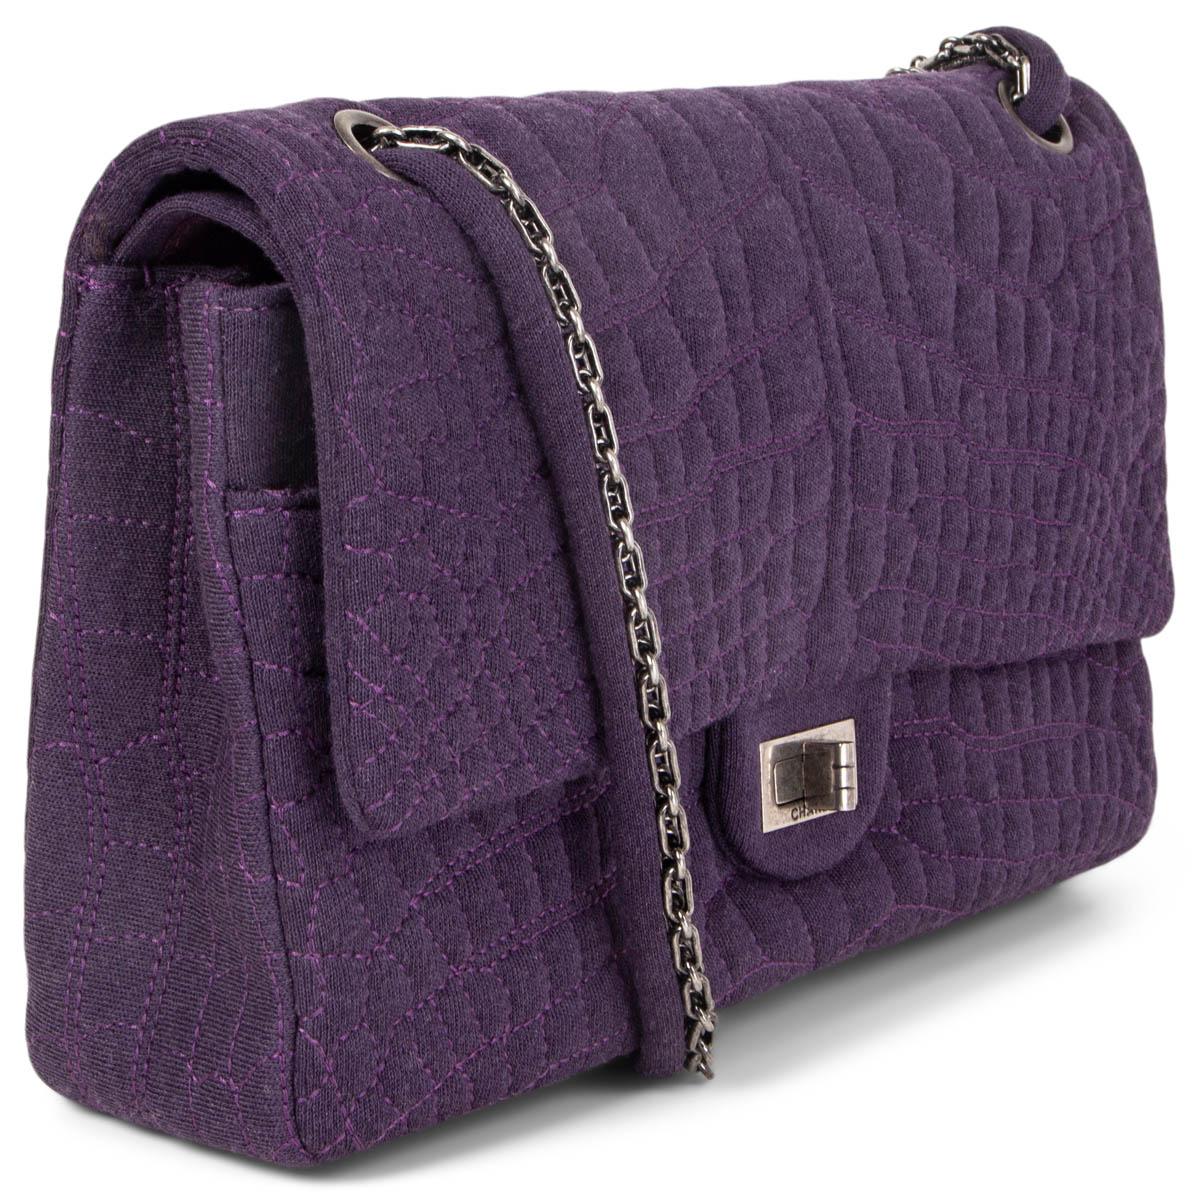 100% authentic Chanel 2.55 Reissue 226 Double Flap Bag in deep purple croc embroidered jersey fabric and is provided with gold-tone hardware. It features a turn-lock closure and a chain-jersey shoulder strap. Lined in deep purple nylon fabric with